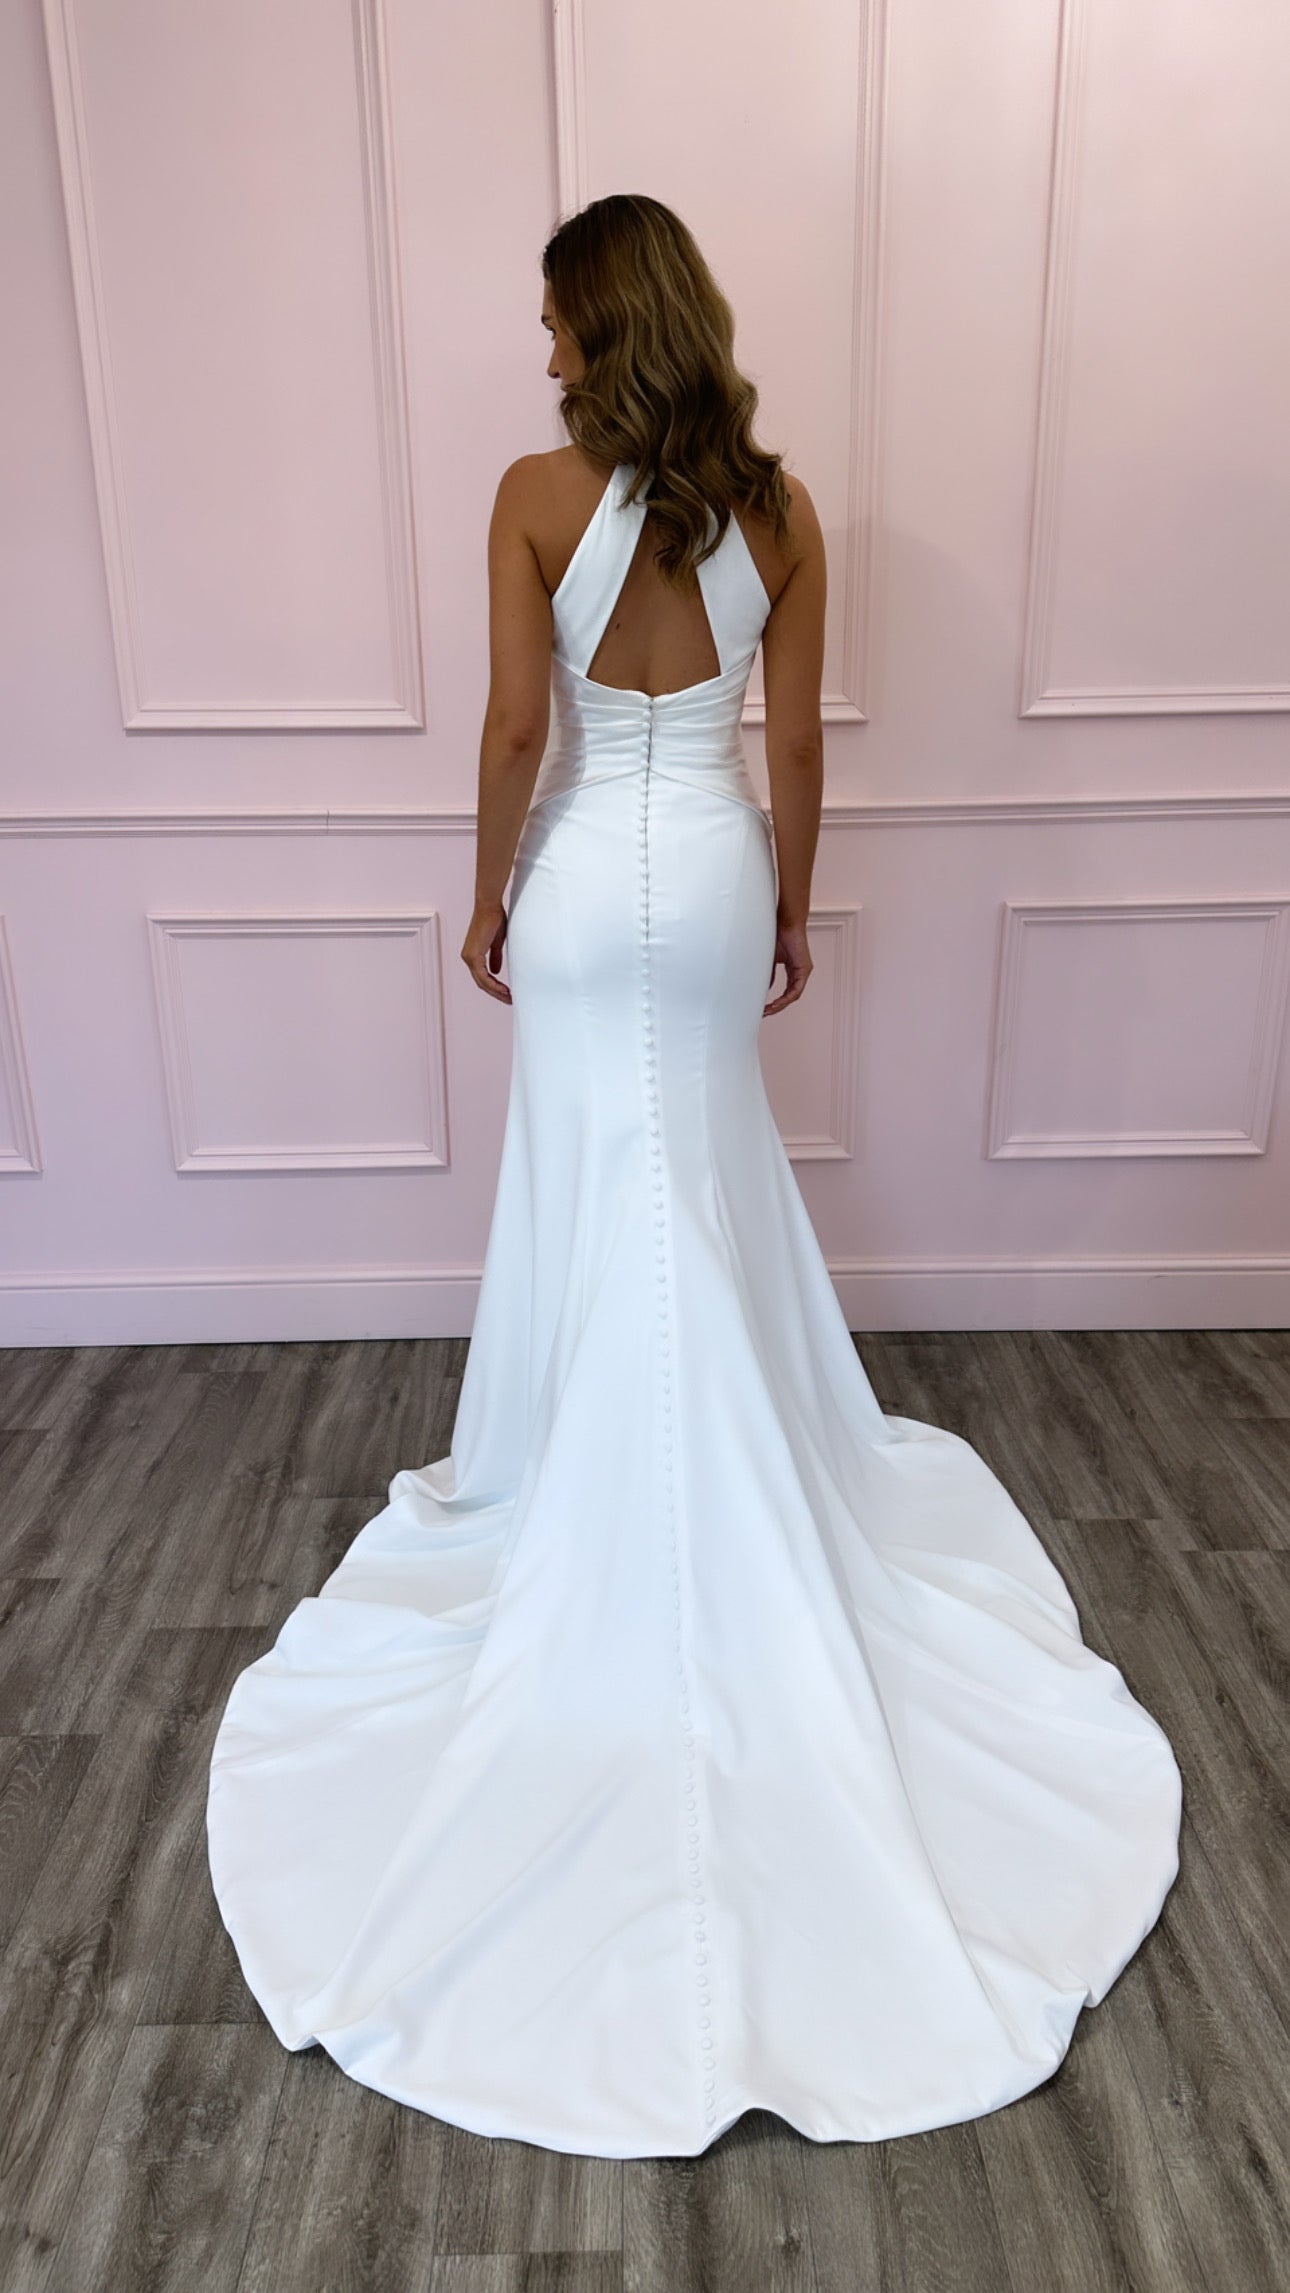 Simple Open back wedding dress with button detail